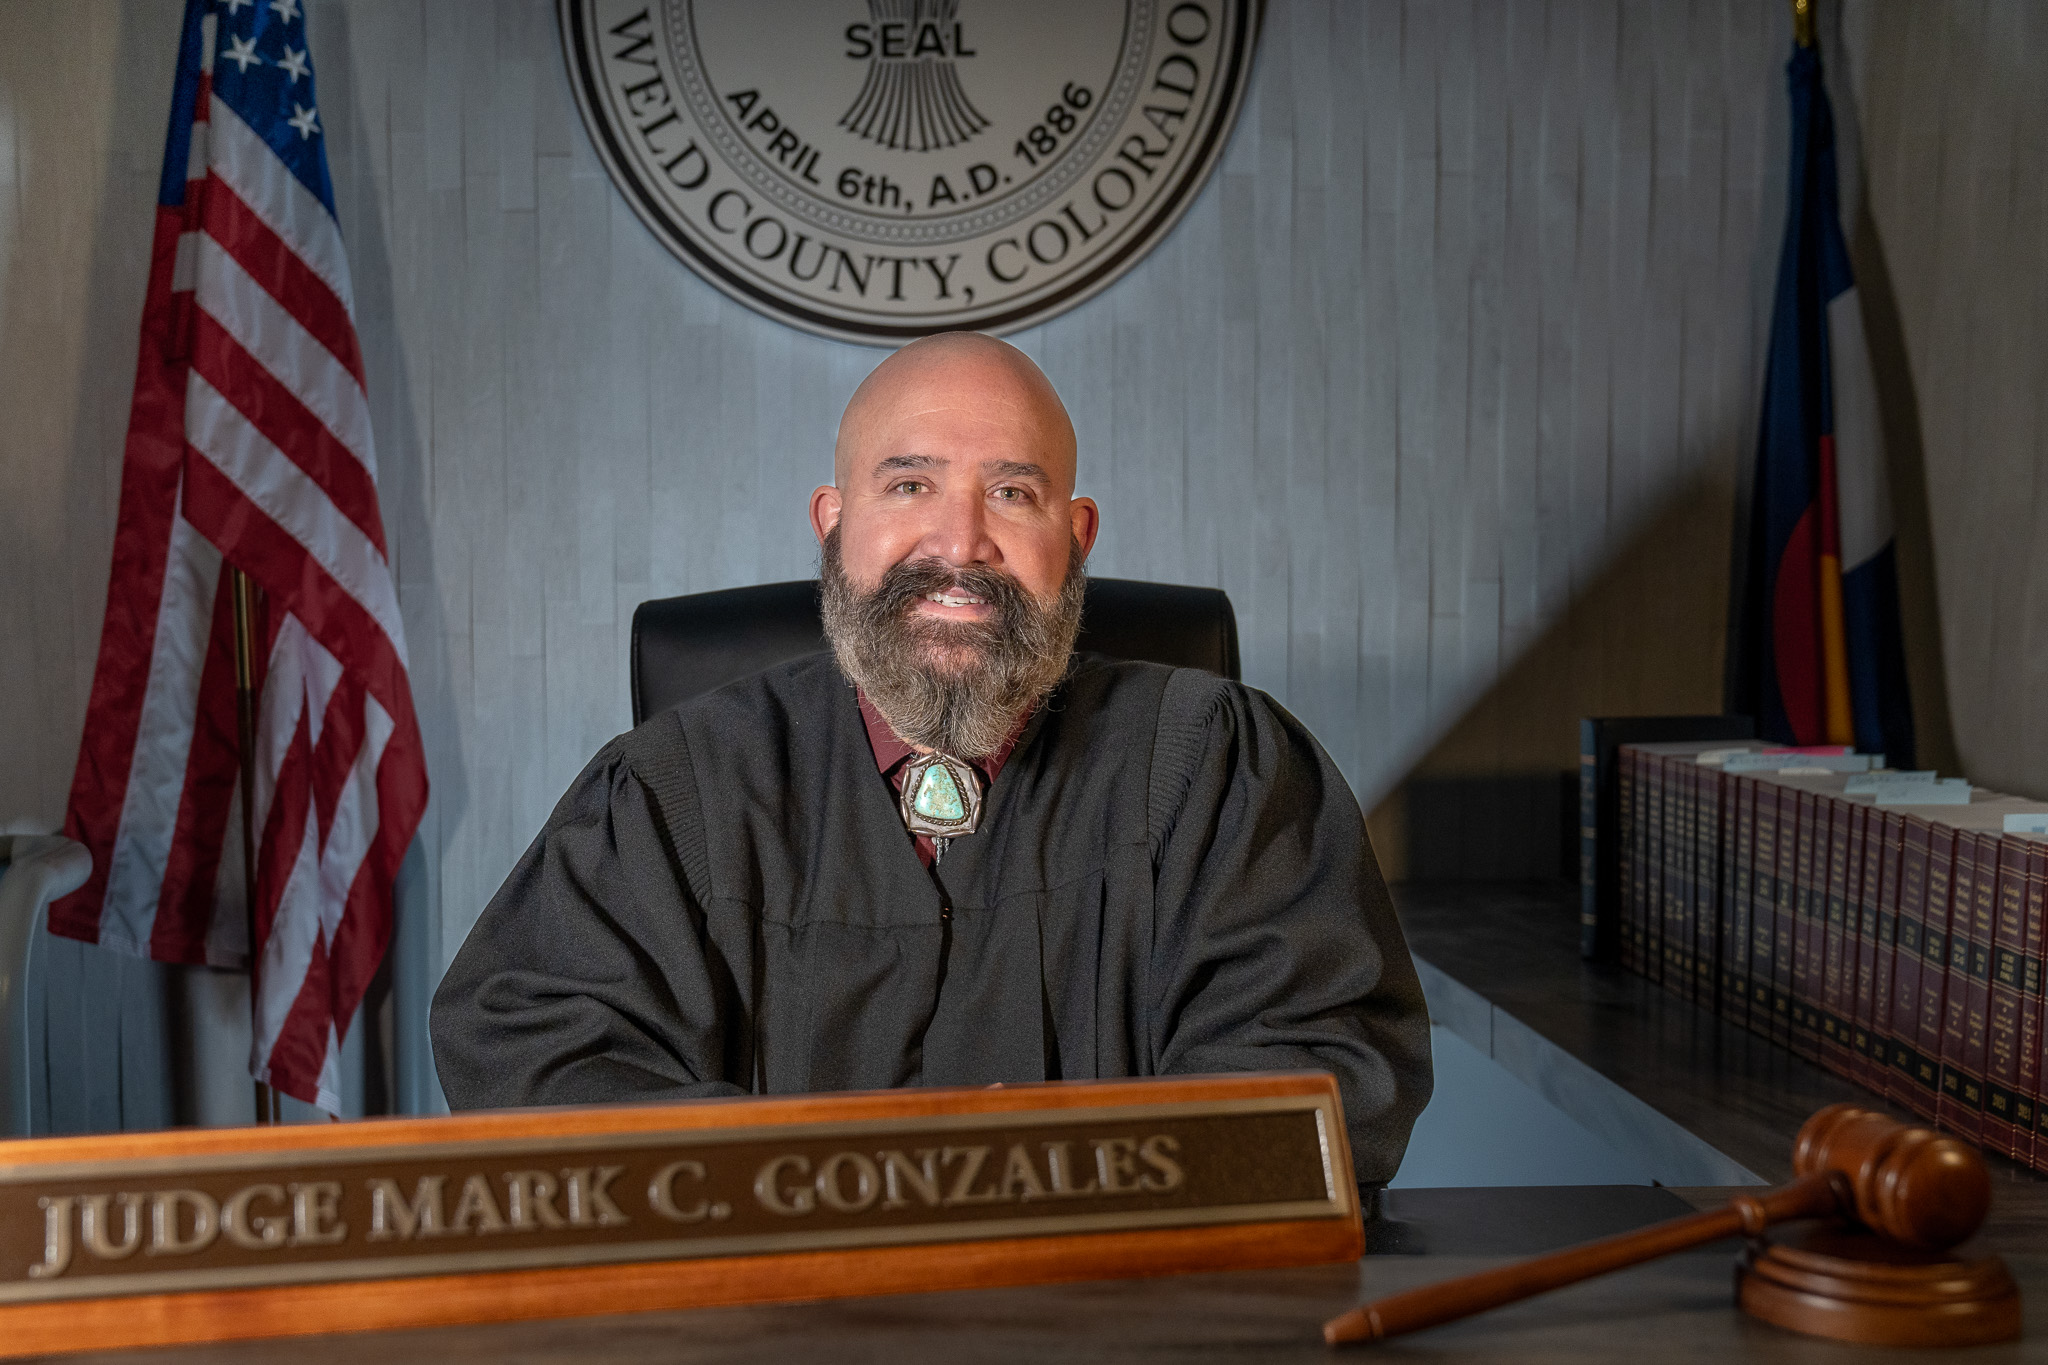 Judge Mark Gonzales sitting on the bench